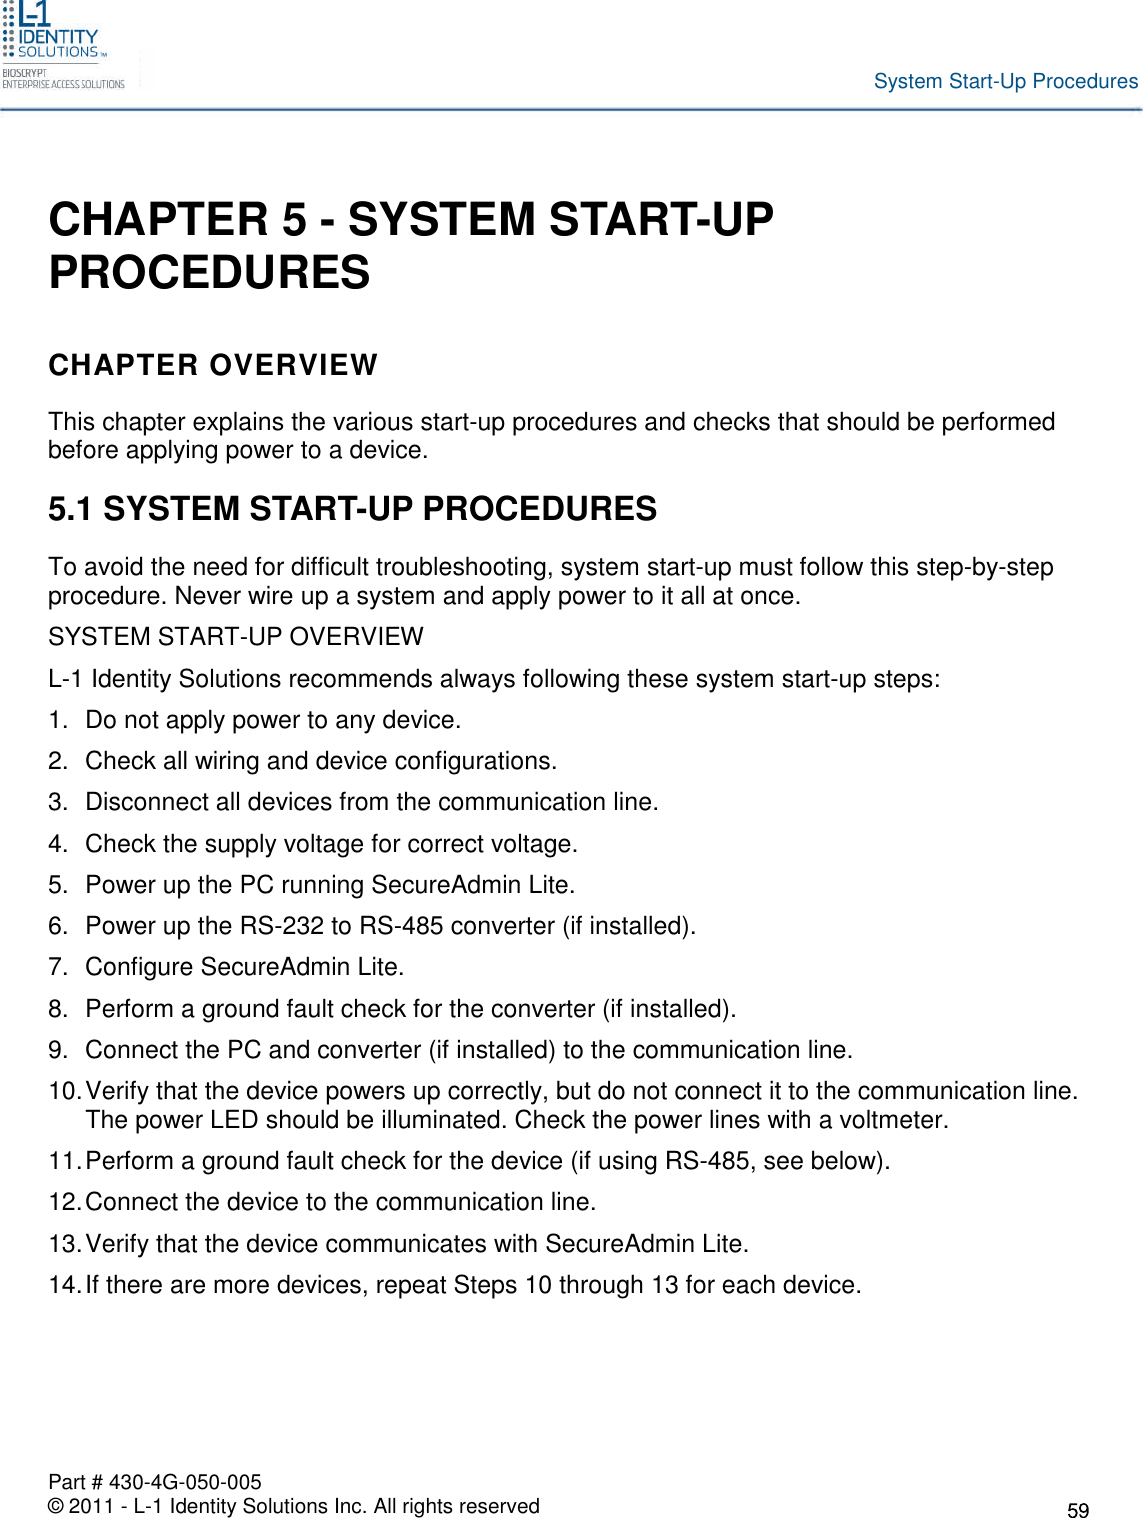 Part # 430-4G-050-005© 2011 - L-1 Identity Solutions Inc. All rights reservedSystem Start-Up ProceduresCHAPTER 5 - SYSTEM START-UPPROCEDURESCHAPTER OVERVIEWThis chapter explains the various start-up procedures and checks that should be performedbefore applying power to a device.5.1 SYSTEM START-UP PROCEDURESTo avoid the need for difficult troubleshooting, system start-up must follow this step-by-stepprocedure. Never wire up a system and apply power to it all at once.SYSTEM START-UP OVERVIEWL-1 Identity Solutions recommends always following these system start-up steps:1. Do not apply power to any device.2. Check all wiring and device configurations.3. Disconnect all devices from the communication line.4. Check the supply voltage for correct voltage.5. Power up the PC running SecureAdmin Lite.6. Power up the RS-232 to RS-485 converter (if installed).7. Configure SecureAdmin Lite.8. Perform a ground fault check for the converter (if installed).9. Connect the PC and converter (if installed) to the communication line.10.Verify that the device powers up correctly, but do not connect it to the communication line.The power LED should be illuminated. Check the power lines with a voltmeter.11.Perform a ground fault check for the device (if using RS-485, see below).12.Connect the device to the communication line.13.Verify that the device communicates with SecureAdmin Lite.14.If there are more devices, repeat Steps 10 through 13 for each device.